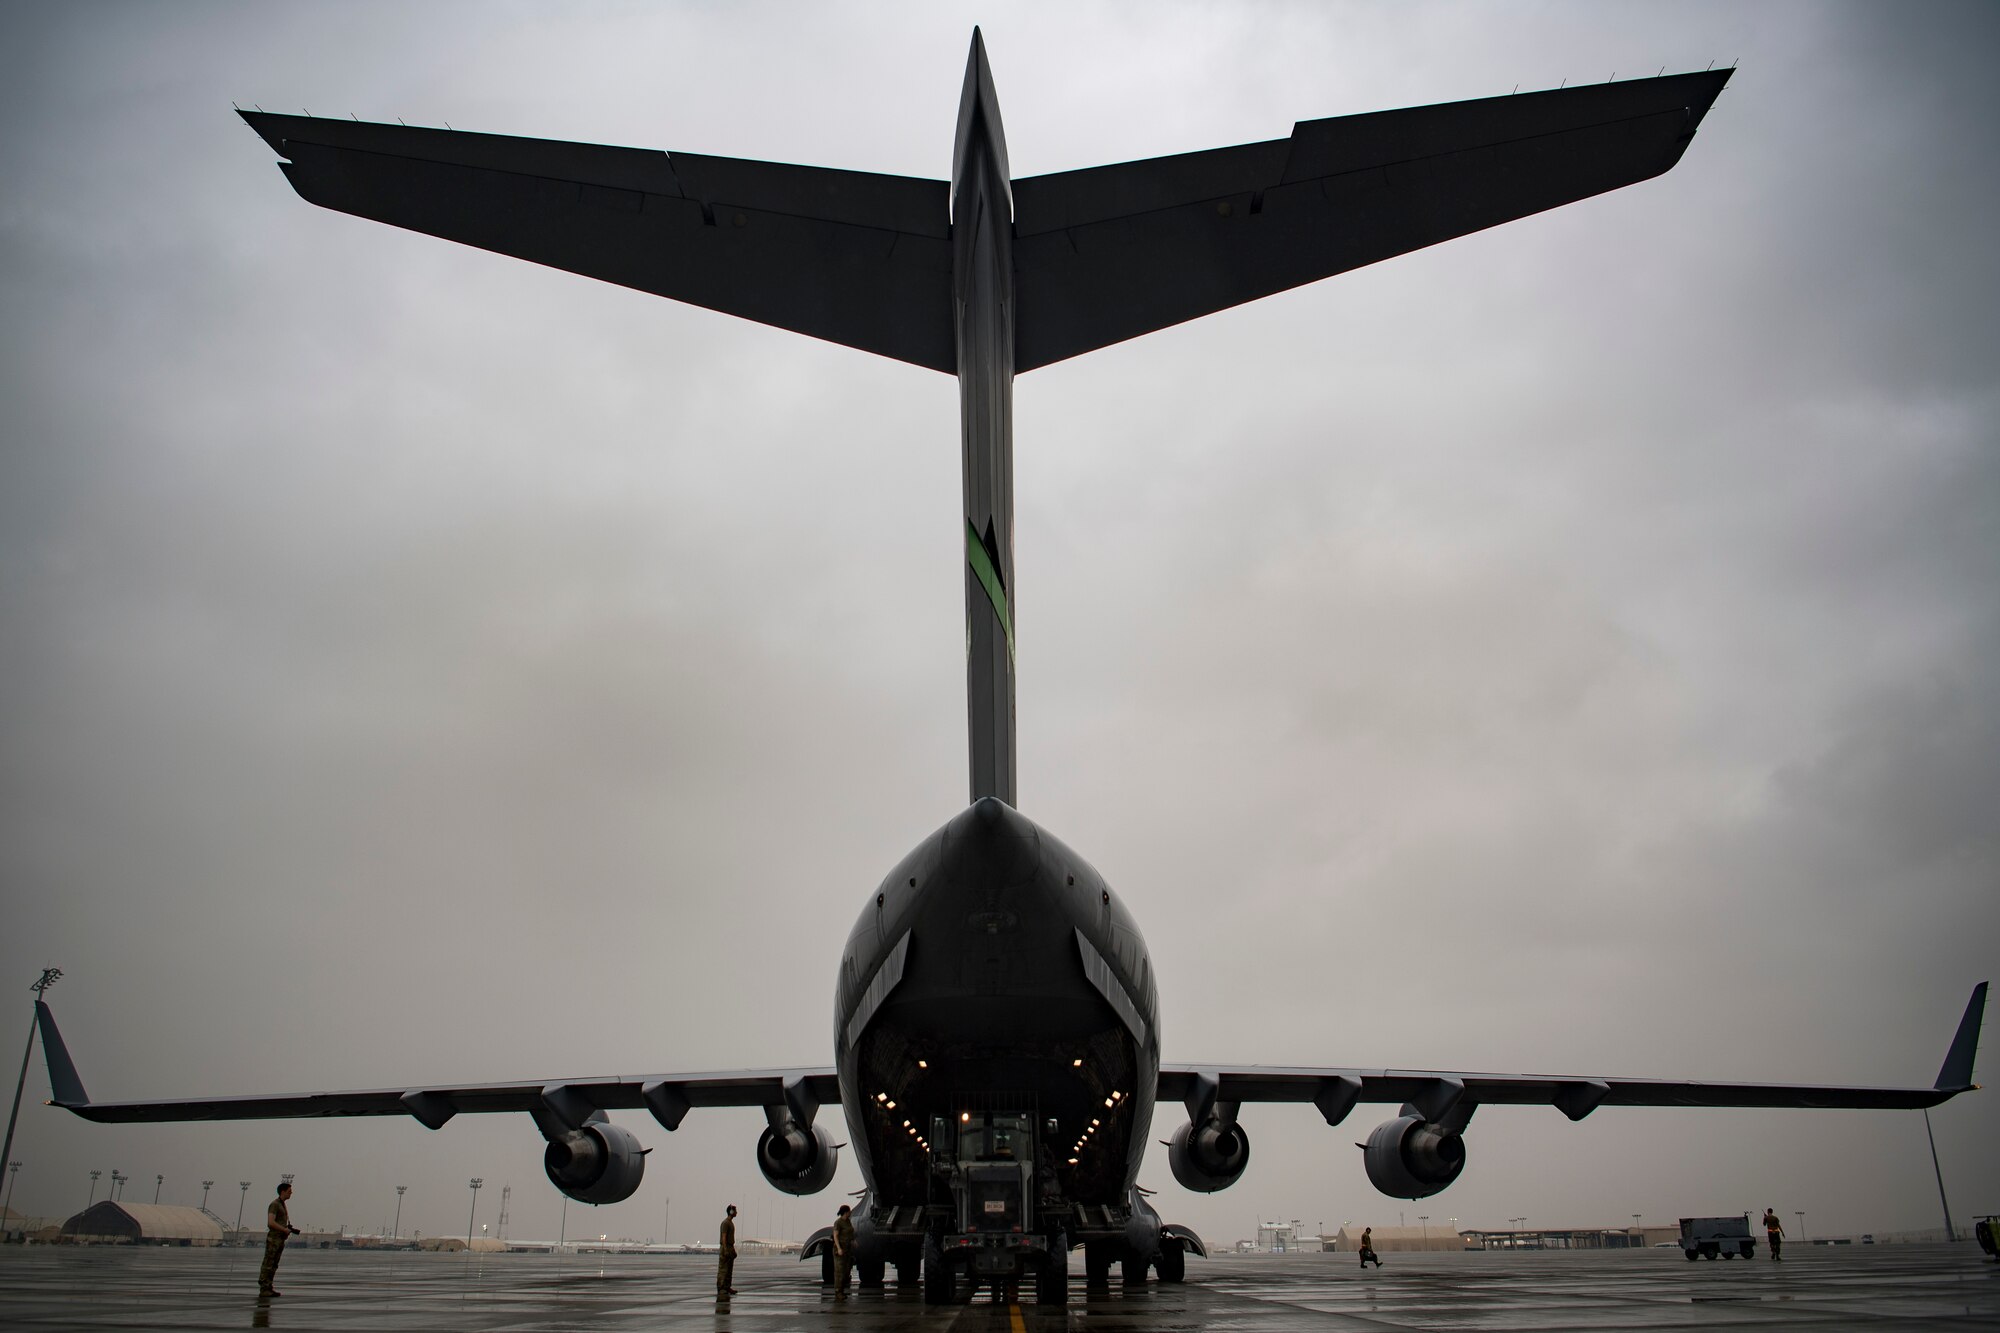 U.S. Air Force Airmen assigned to 746th Expeditionary Logistics Readiness Squadron load cargo into a C-17 Globemaster III assigned to the 816th Expeditionary Airlift Squadron at Al Udeid Air Base, Qatar, Jan. 10, 2020.